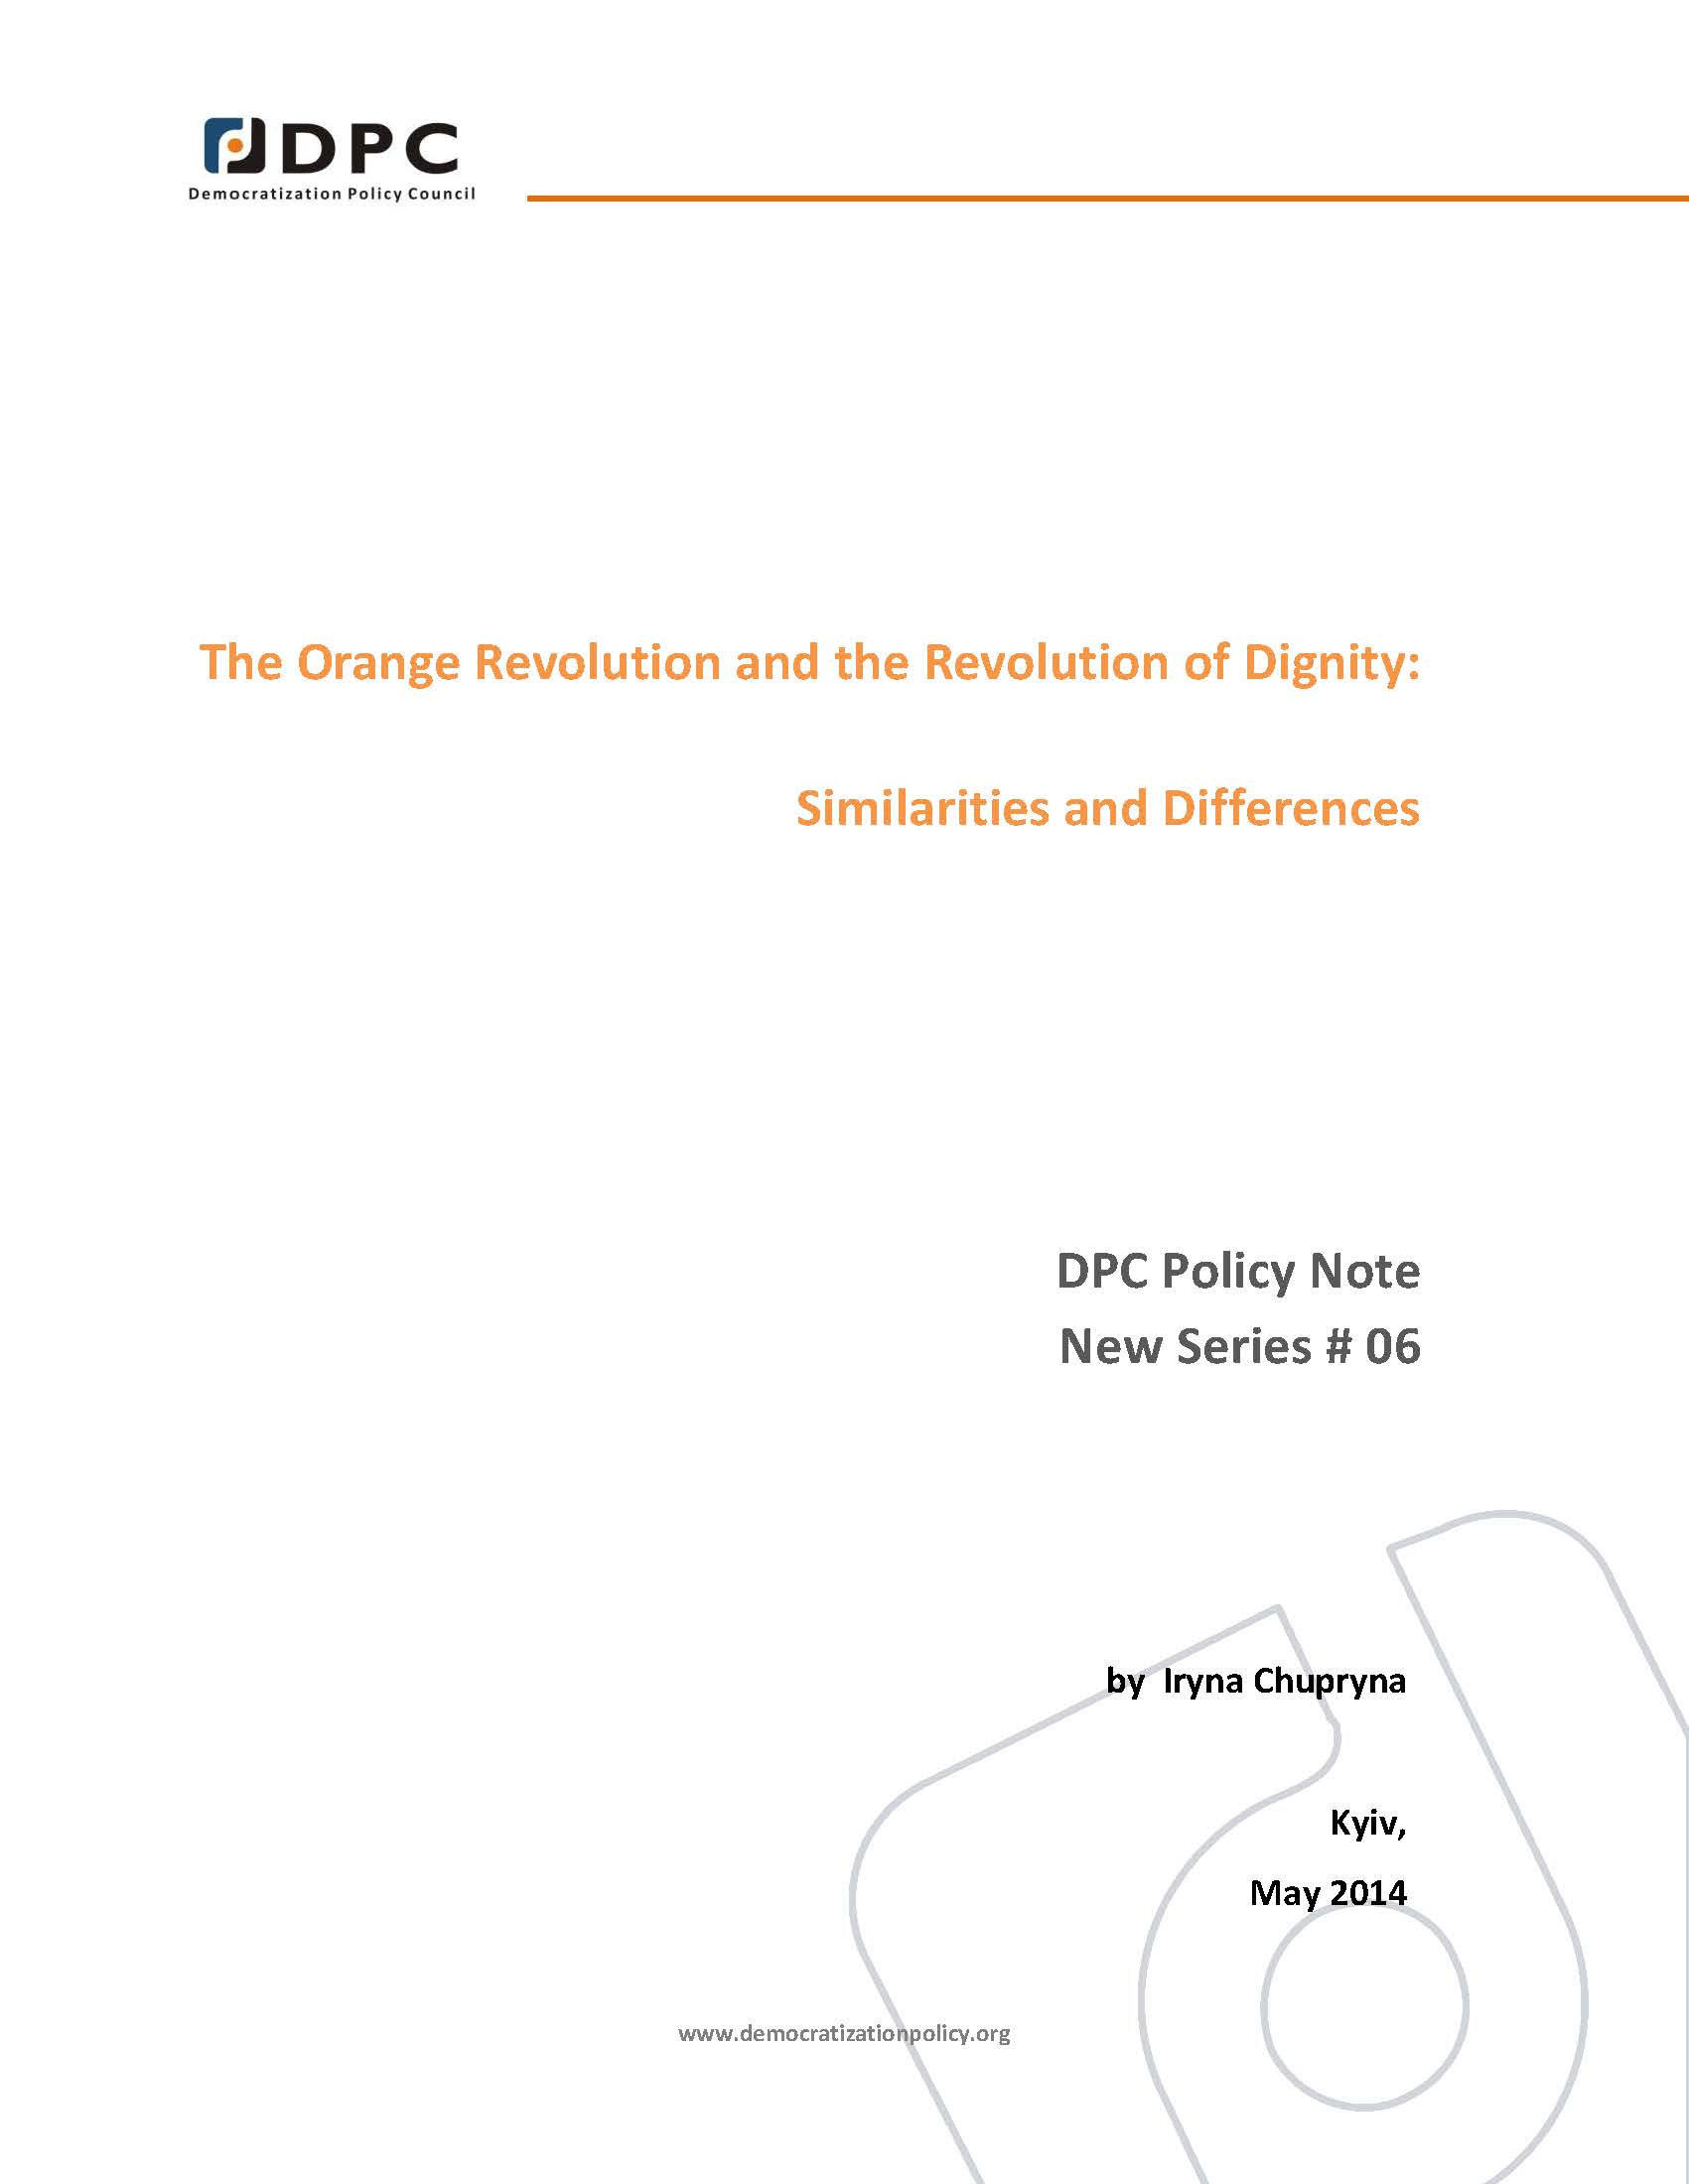 DPC POLICY NOTE 06: The Orange Revolution and the Revolution of Dignity: Similarities and Differences. Cover Image